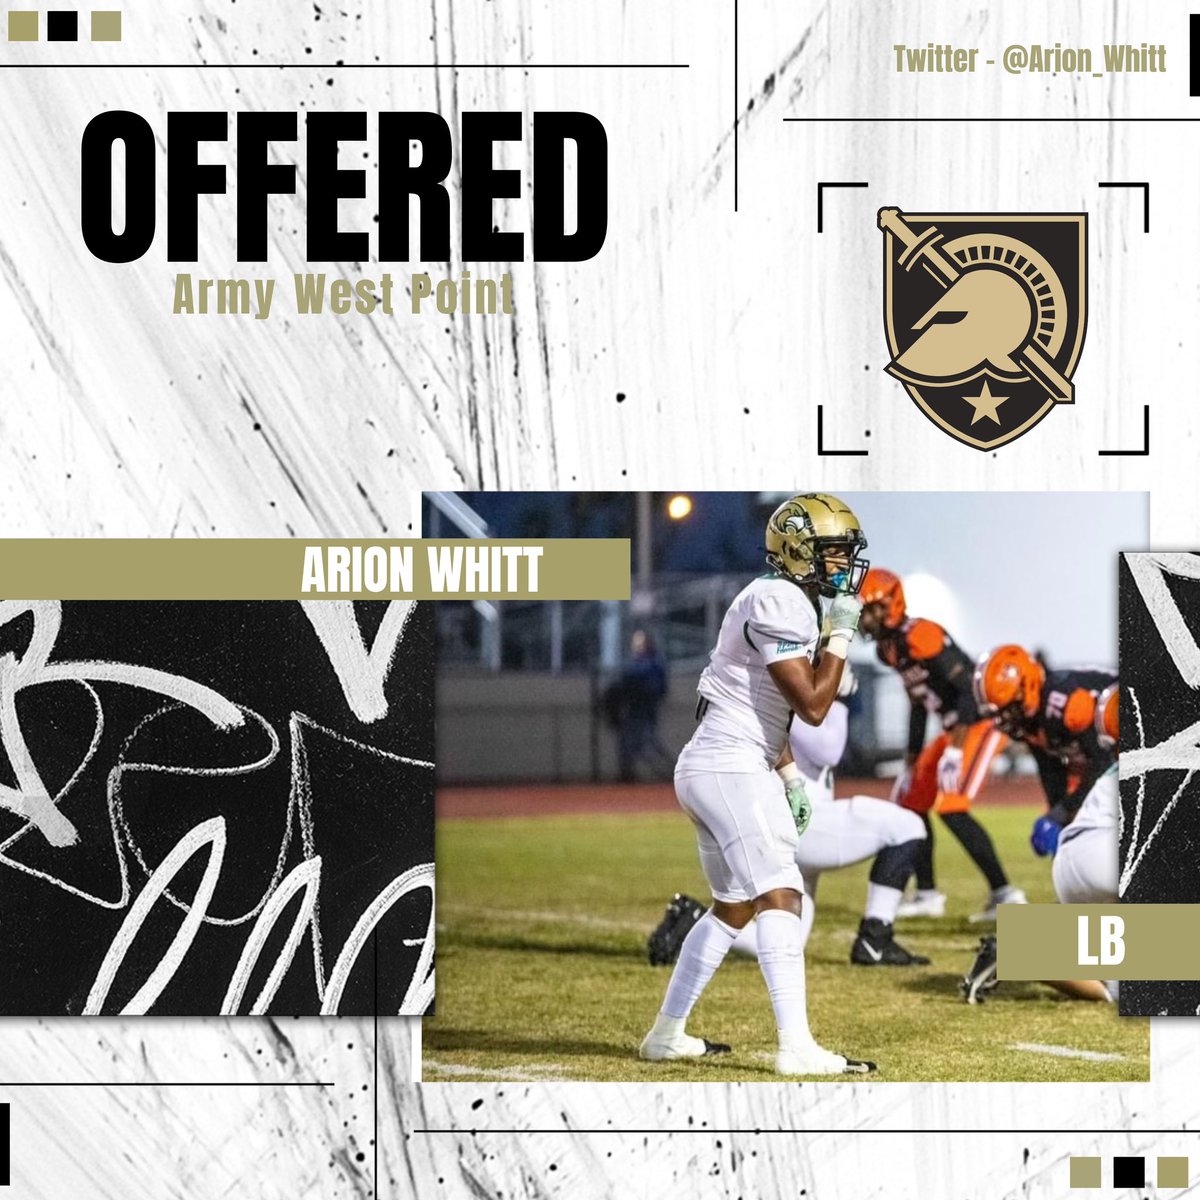 Congratulations to @FIHSFOOTBALL 2025 LB @arion_whitt for receiving his first offer from @ArmyWP_Football #RecruitTheIsland #SoarHigher